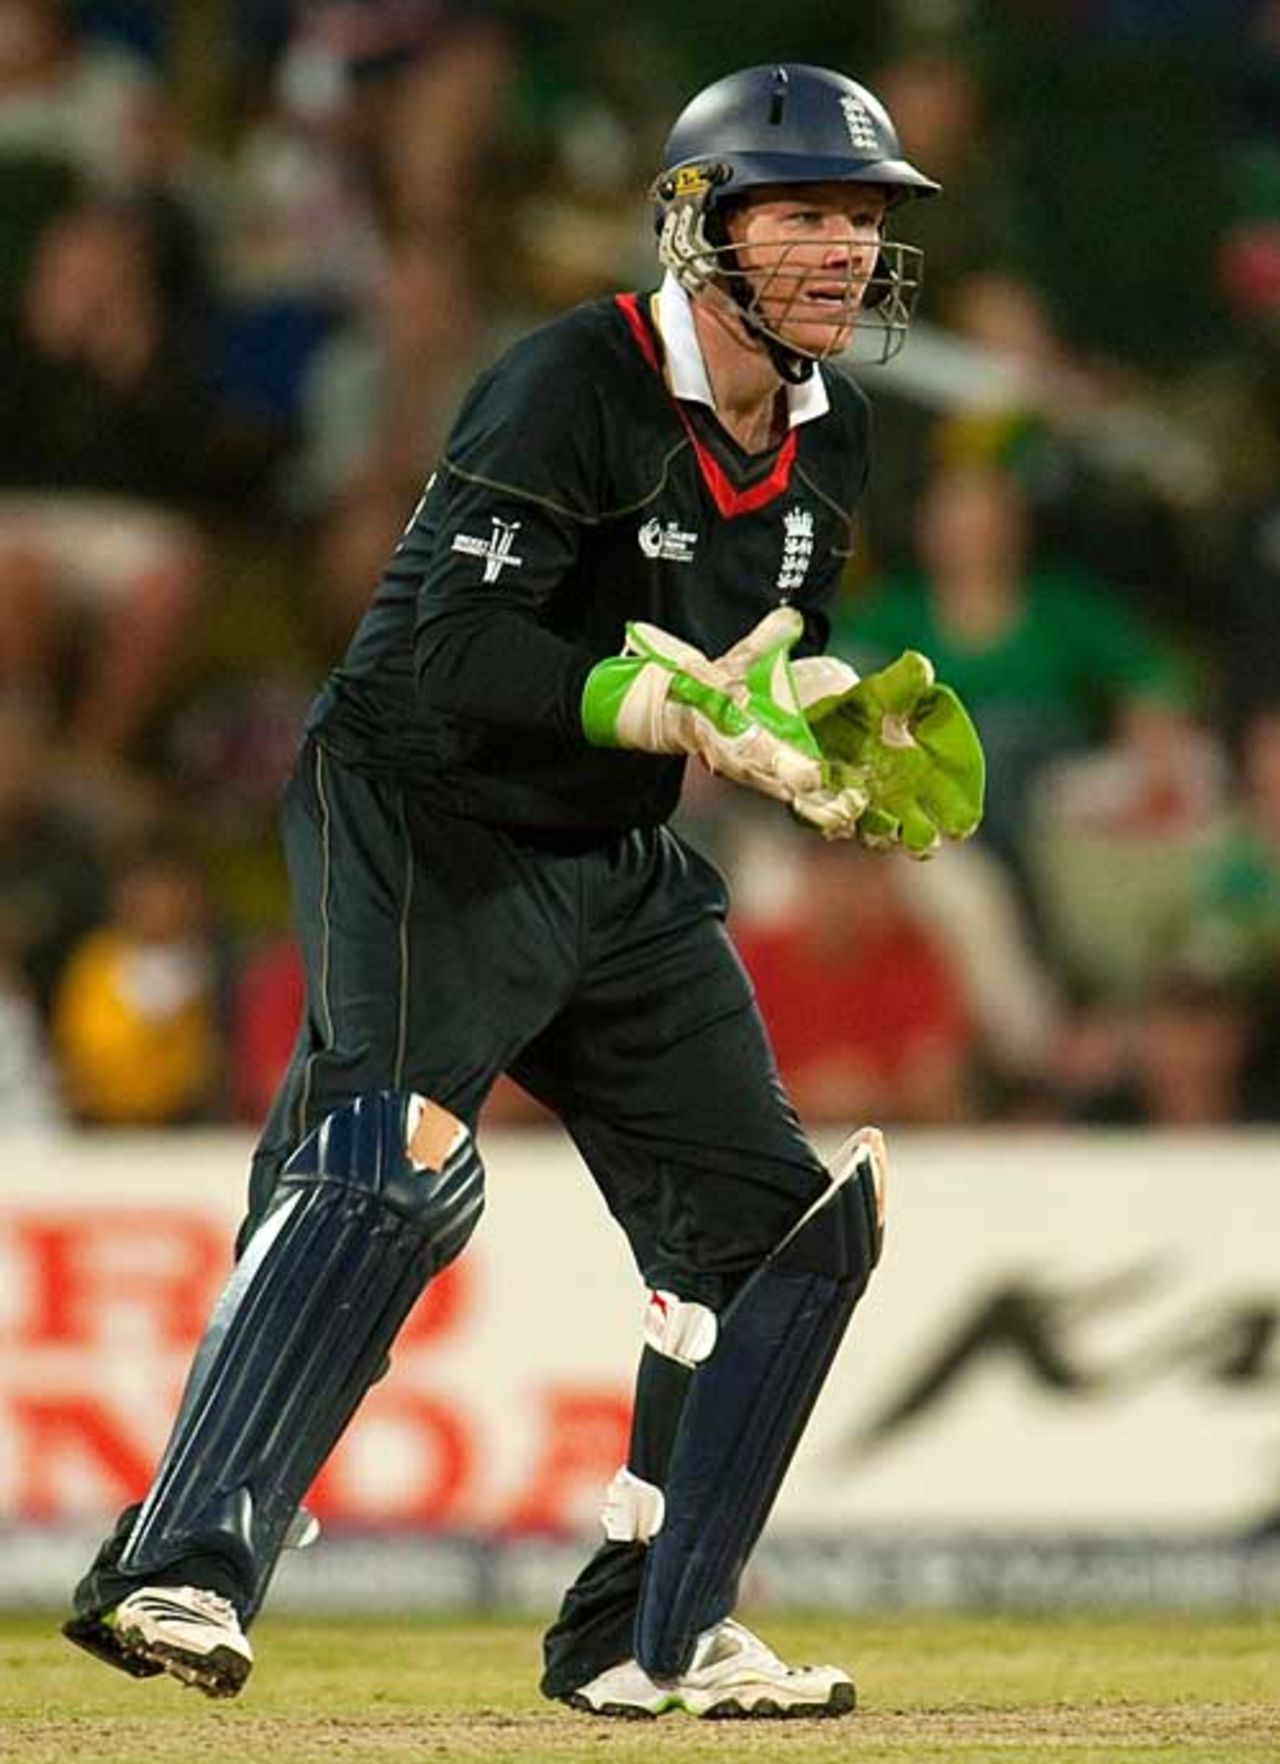 Eoin Morgan kept wicket for England after Matt Prior went down ill, South Africa v England, ICC Champions Trophy, Group B, Centurion, September 27, 2009